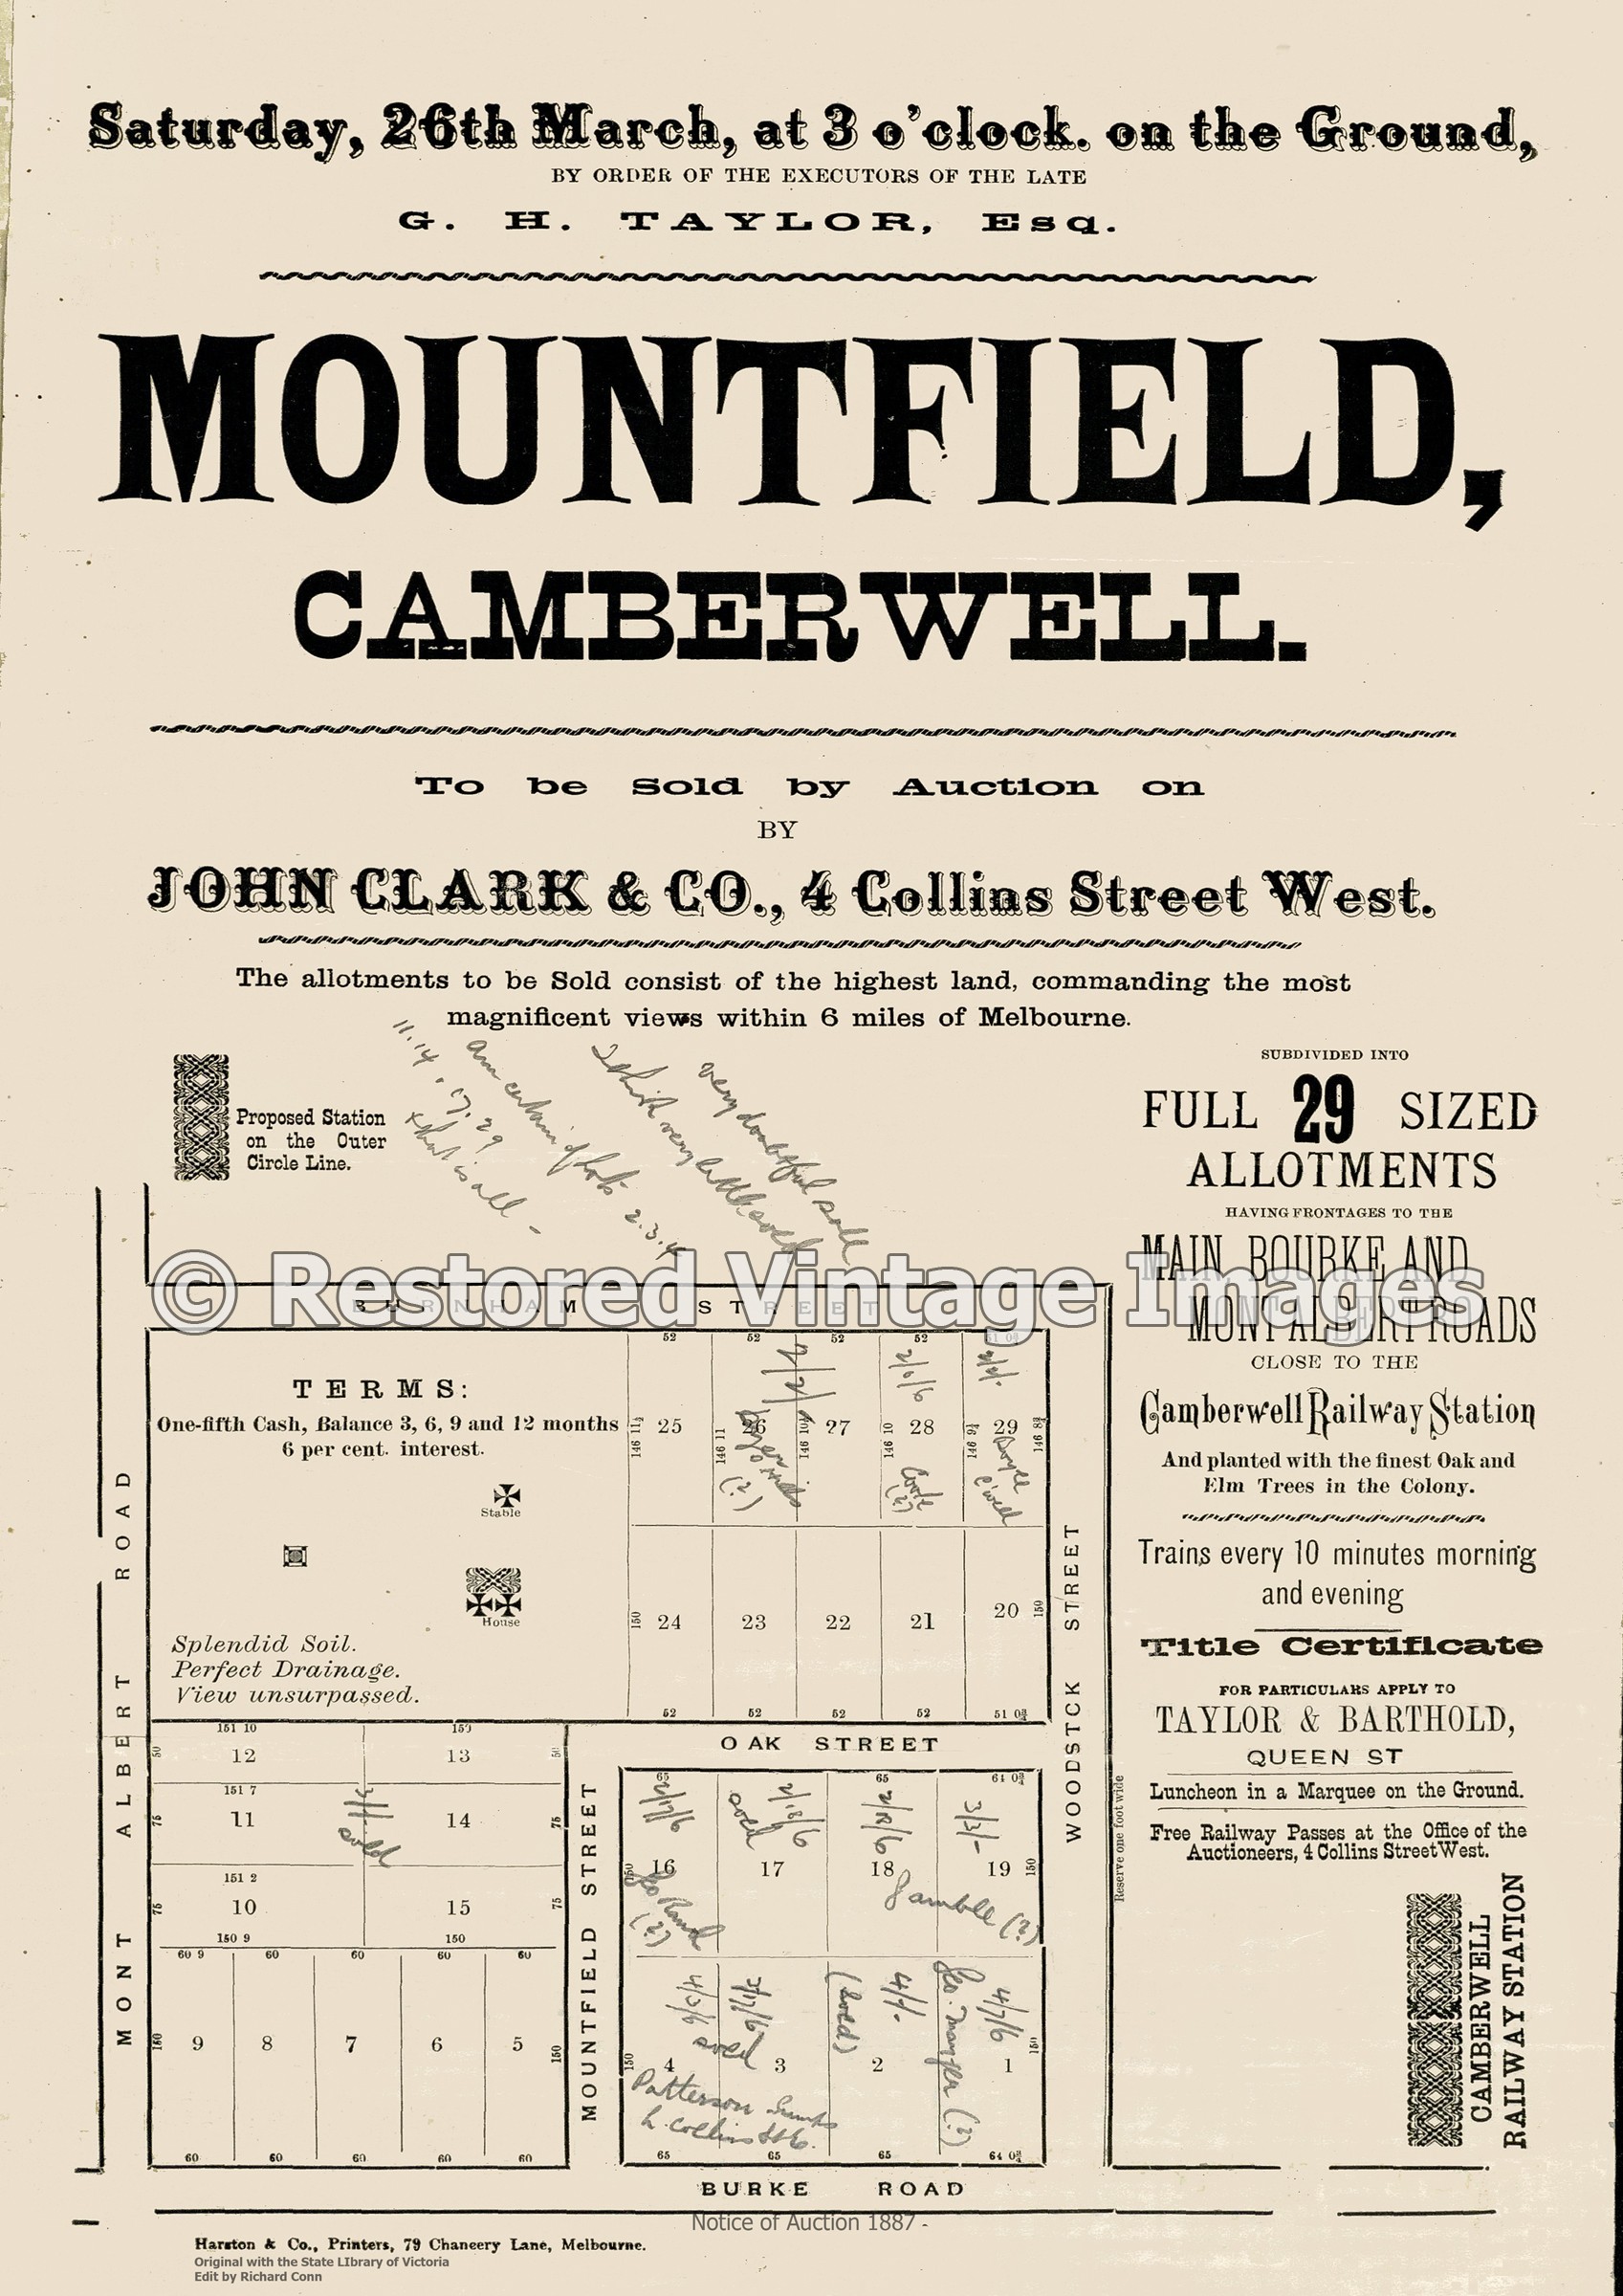 Mountfield Camberwell 26th March 1887 – Canterbury